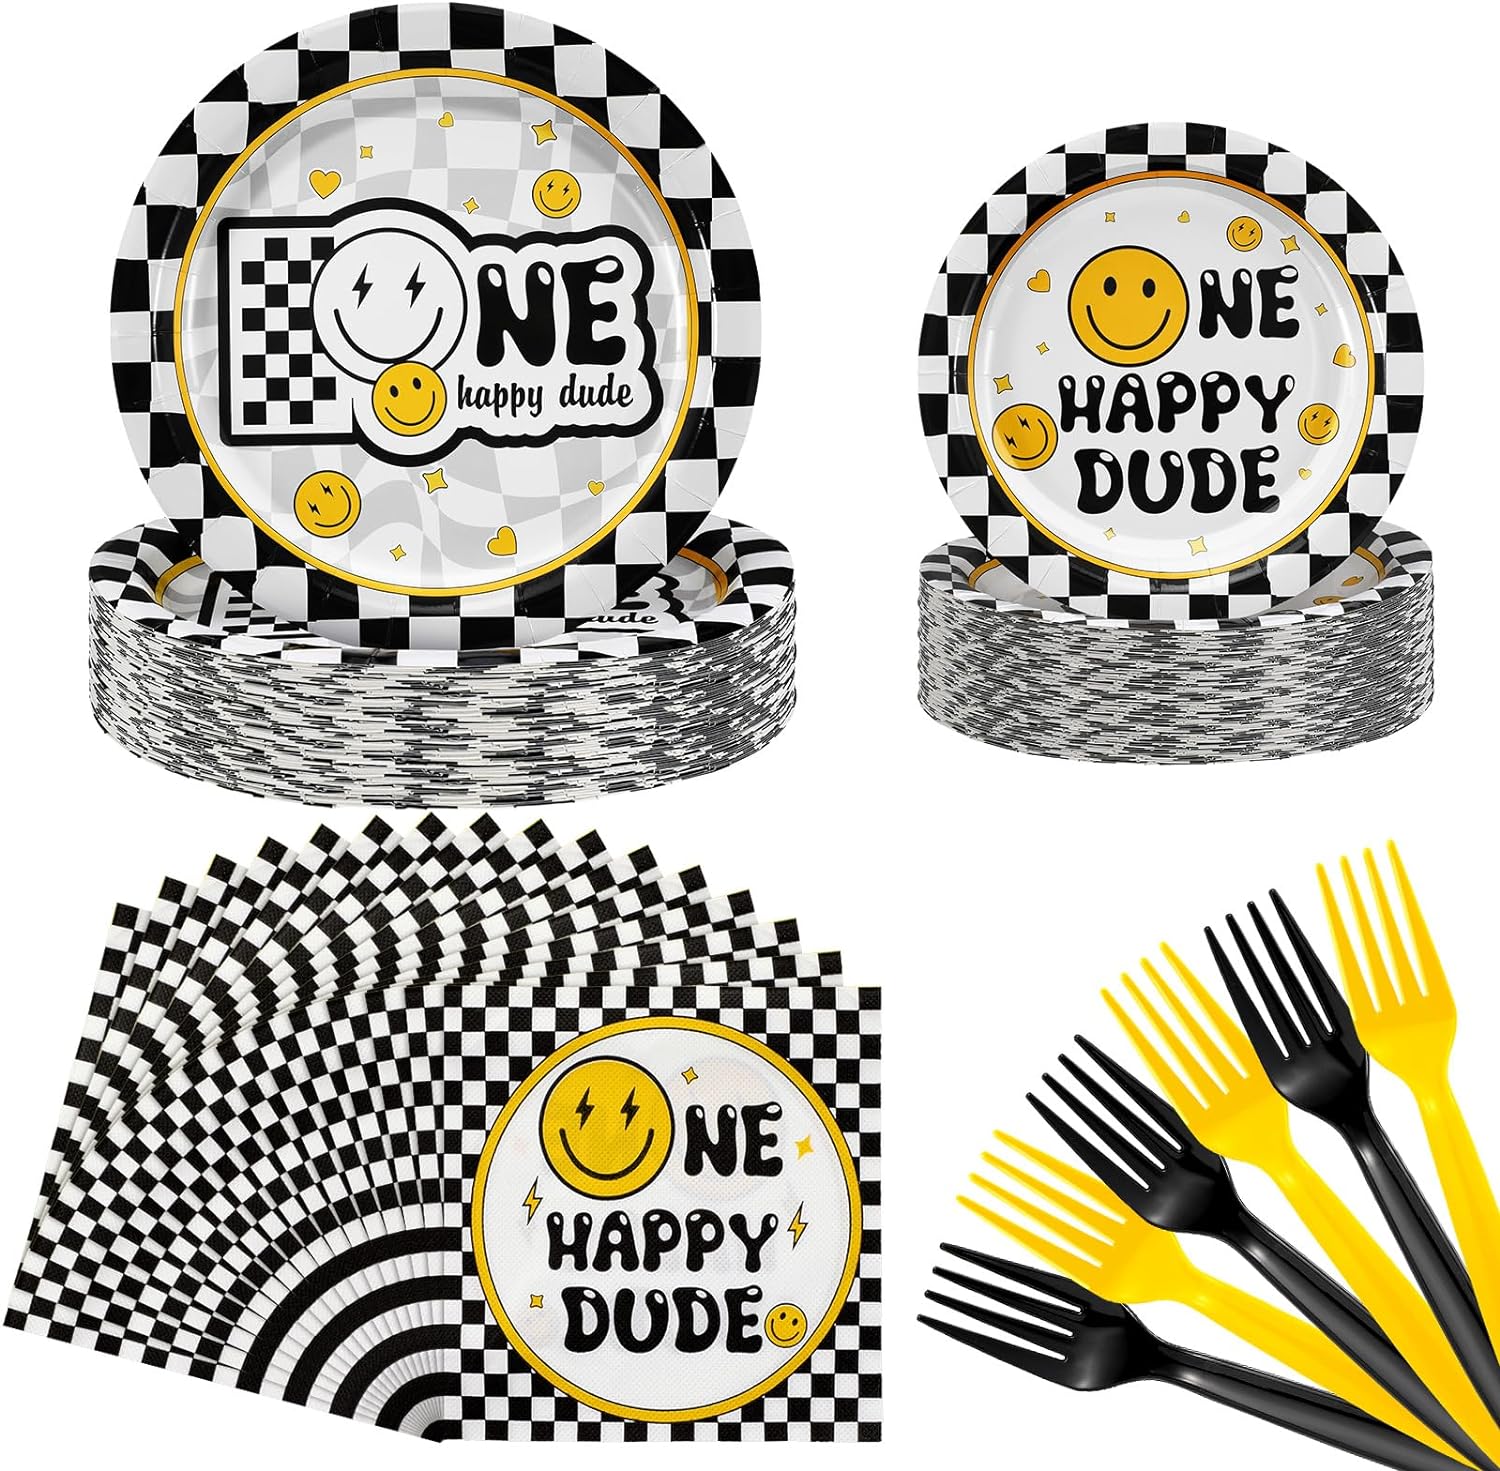 Umigy 96 Pcs One Happy Dude Birthday Party Decorations One Happy Dude Party Tableware Smile Face Party Supplies for 24 Guests Smile Plates Cups Napkins Forks for 1st Birthday Party